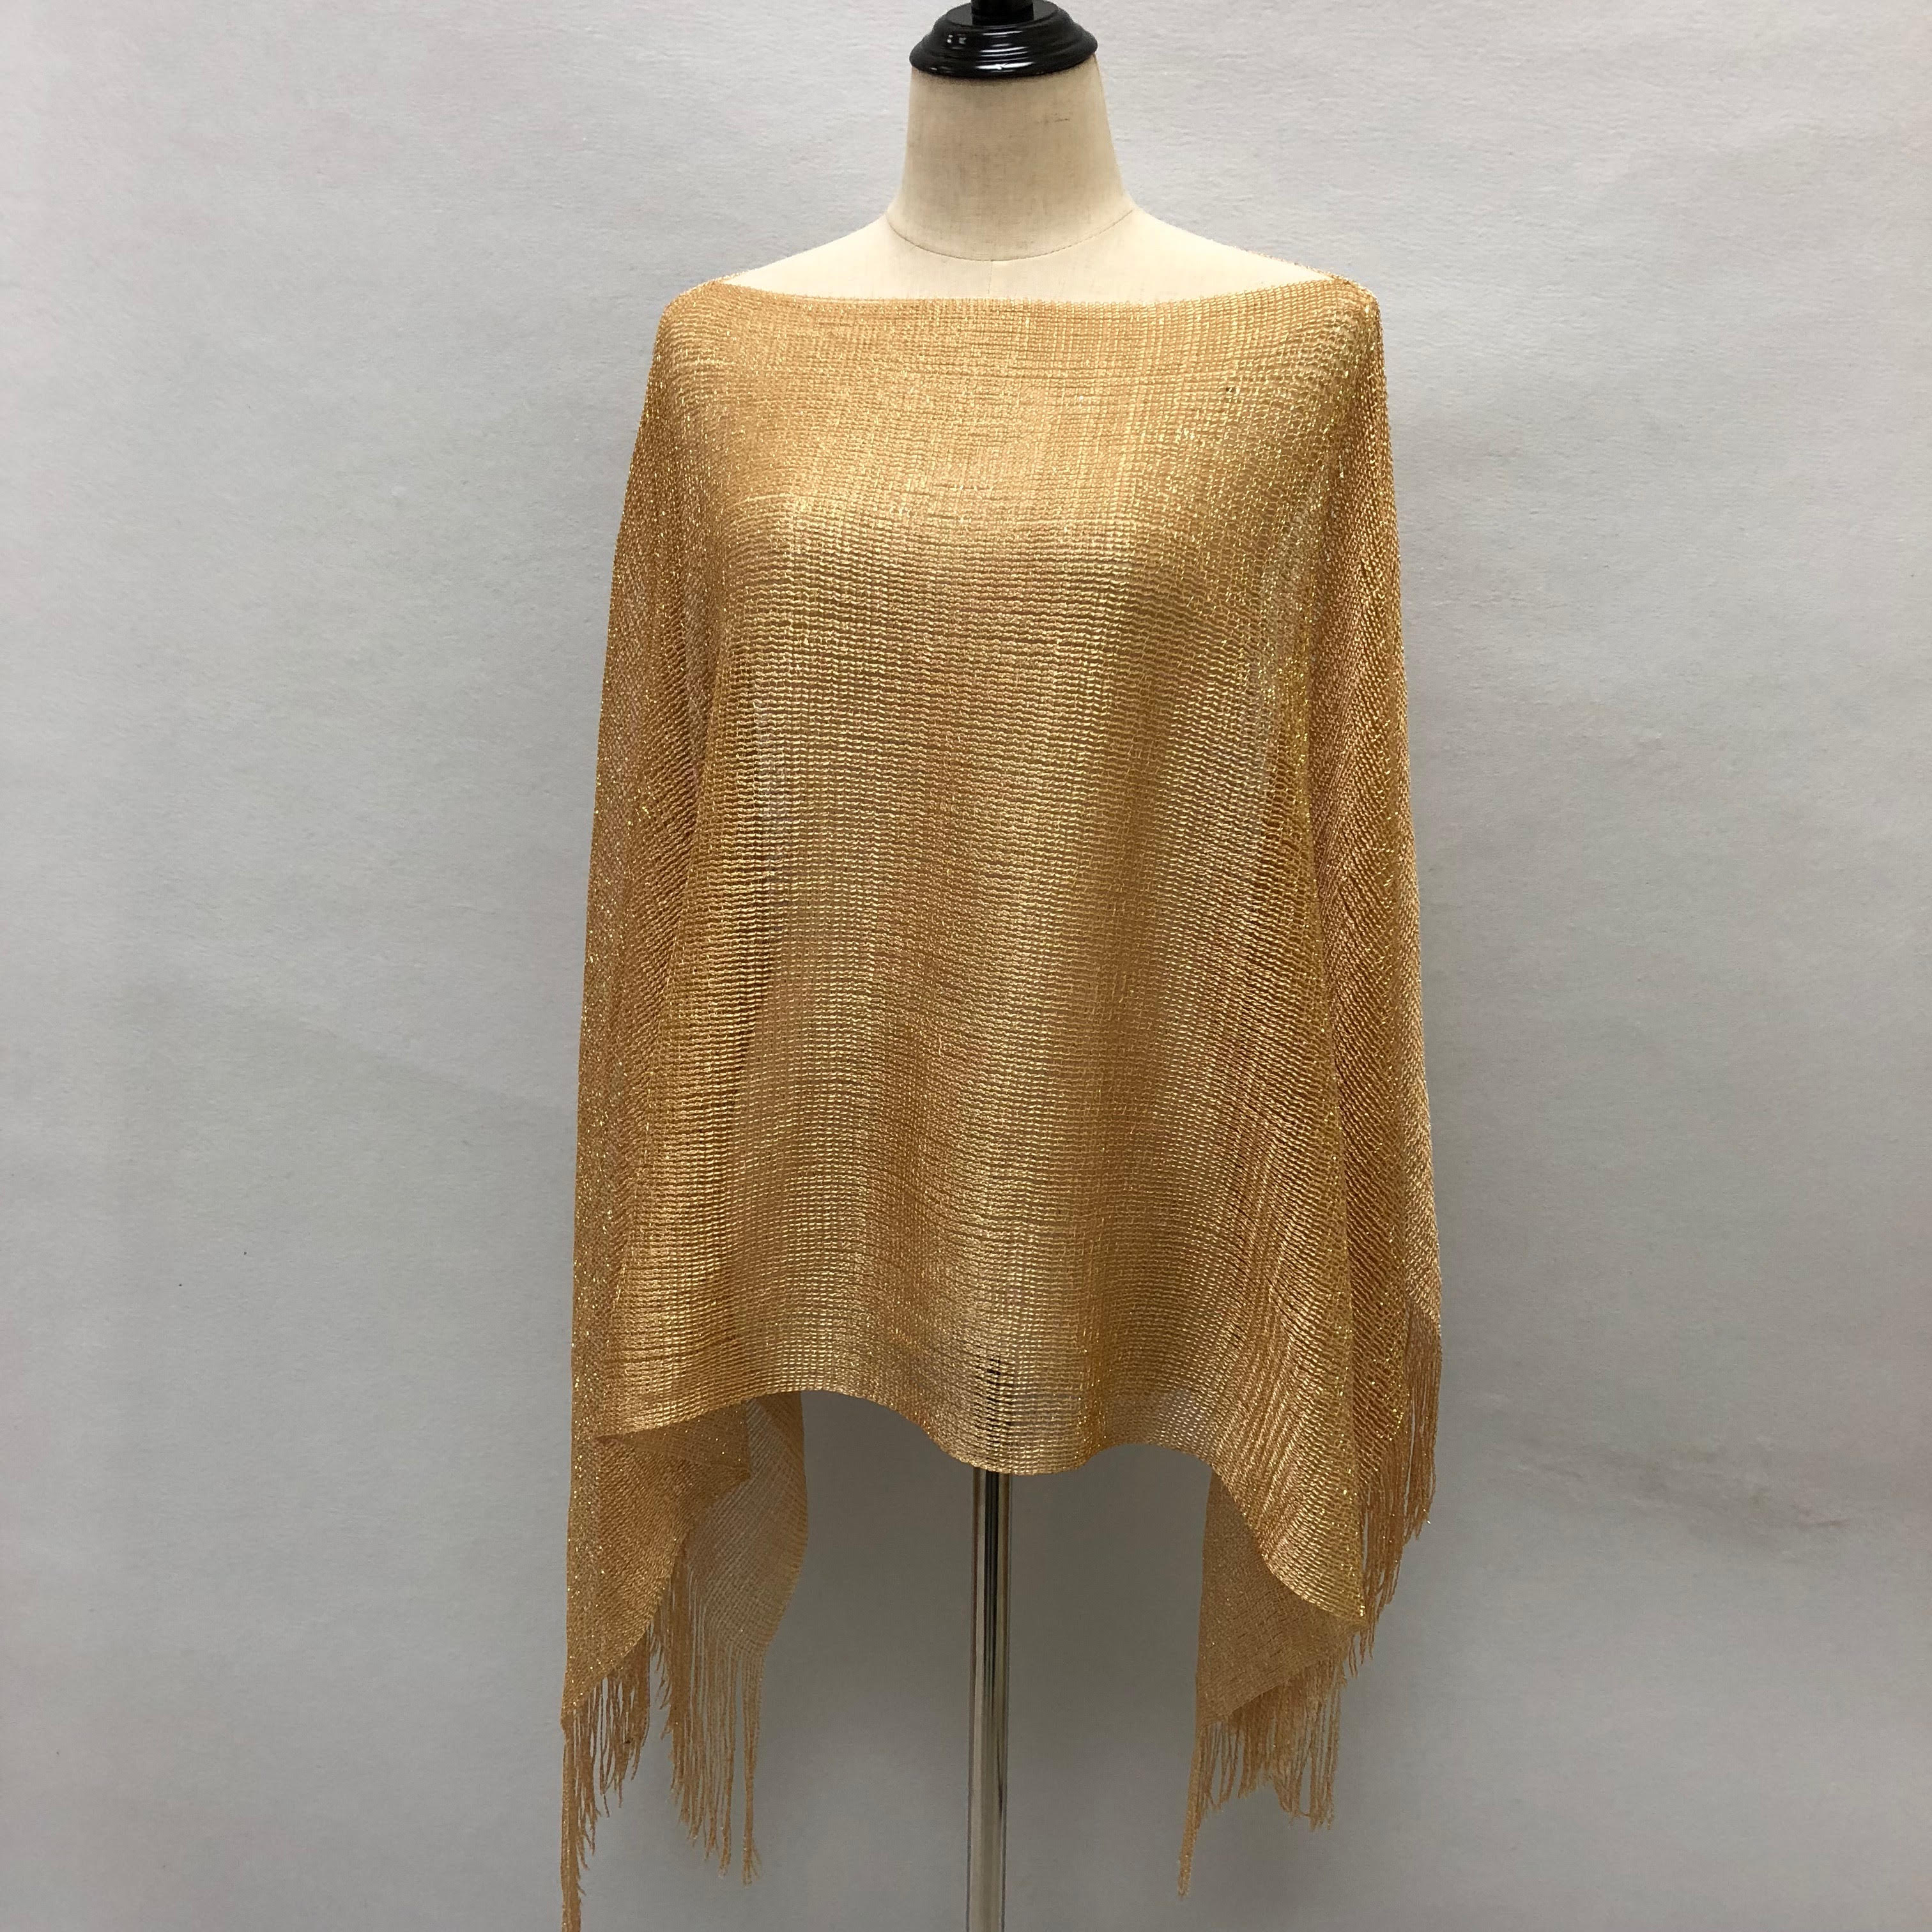 AM231261 Shimmer and Shine Poncho:Gold [AM231261] - $5.75 : Wholesale ...